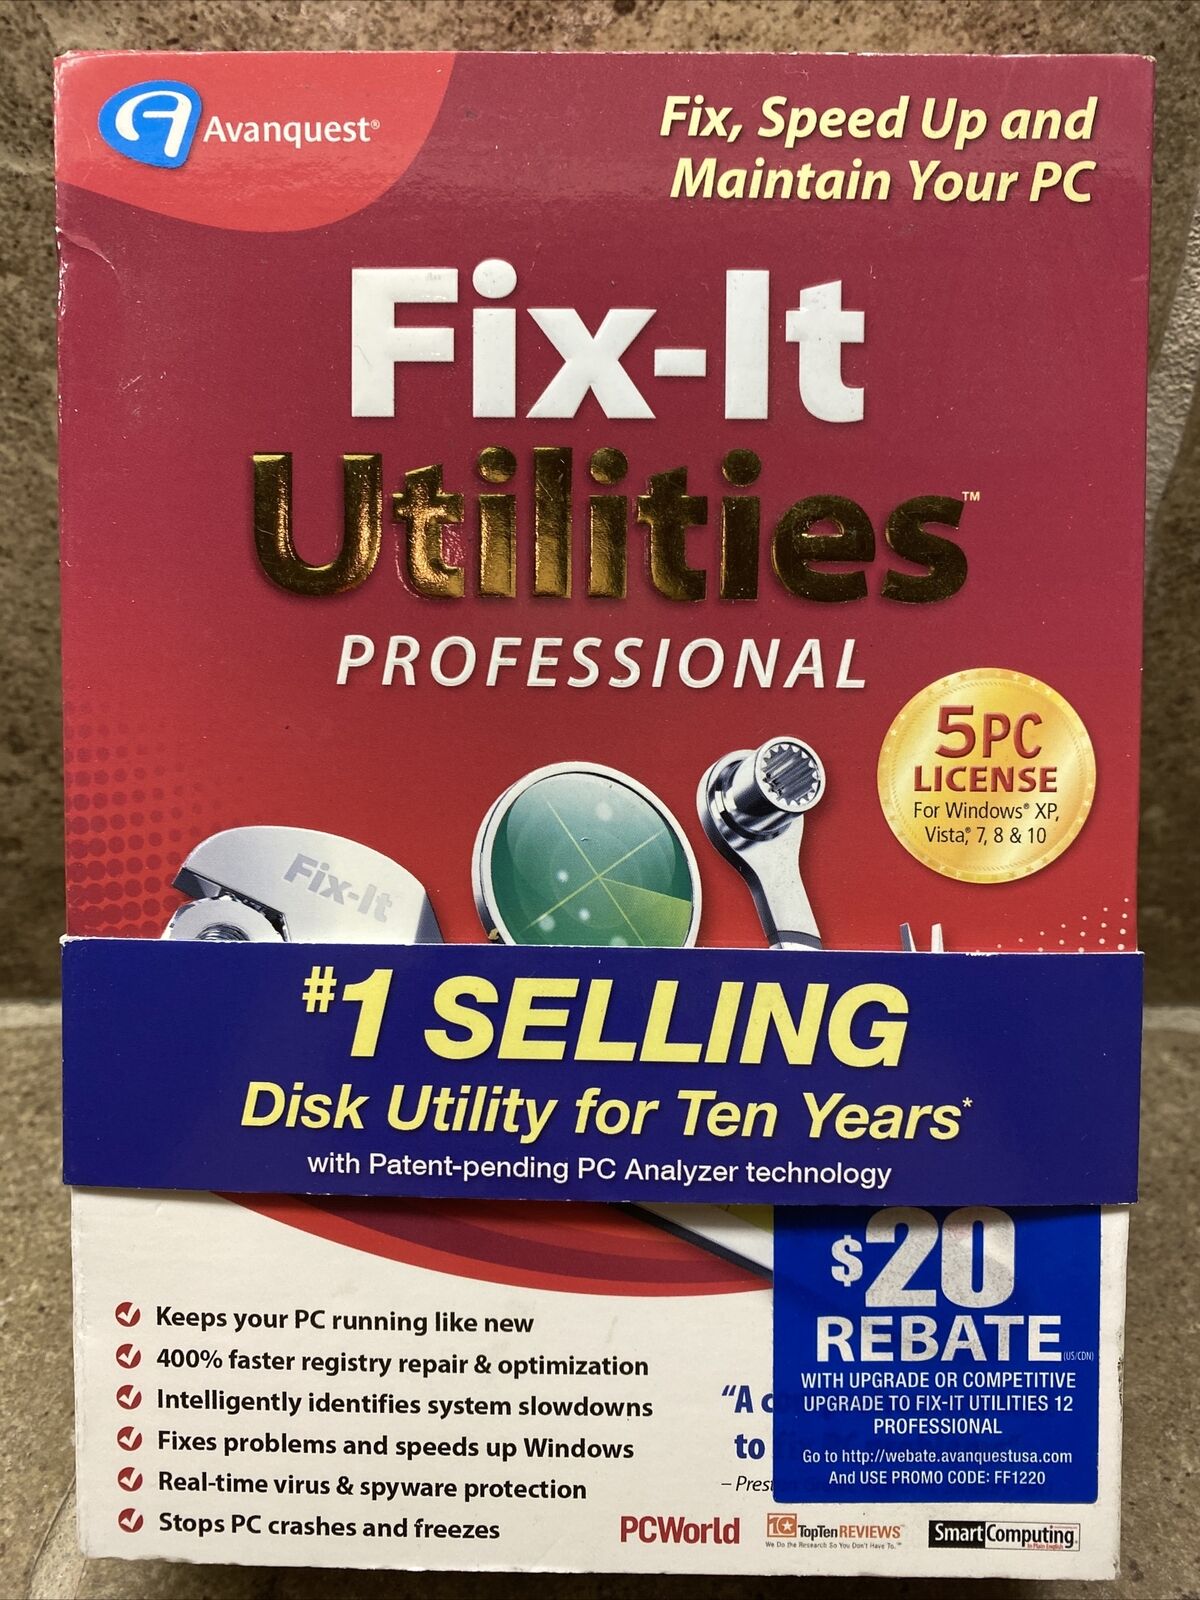 🔥Fix-It Utilities Professional 5 Pc License #1 Selling Disk Utility BEST DEAL🔥